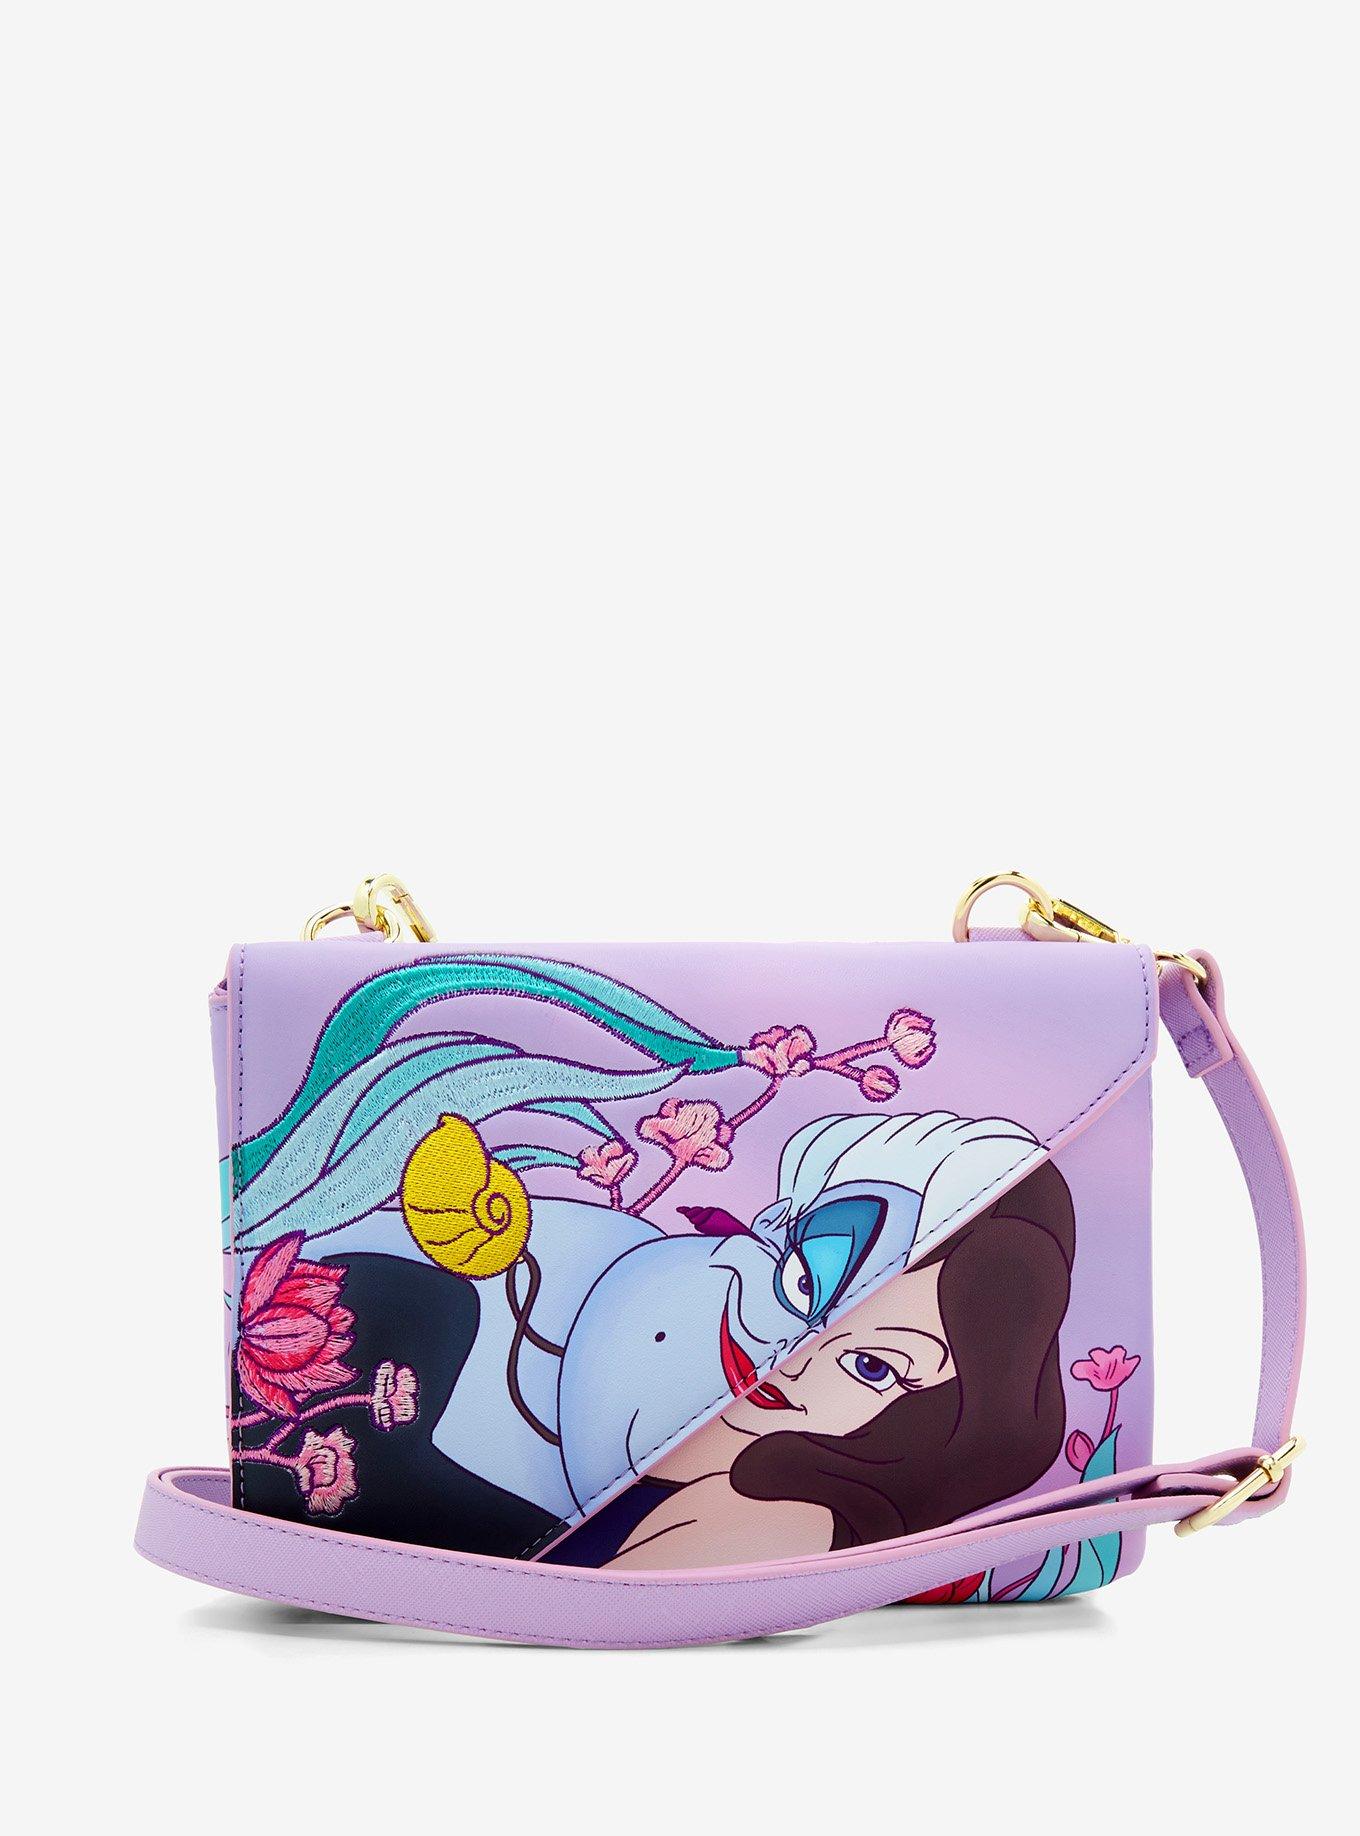 Loungefly Disney The Little Mermaid Ursula Floral Mini Backpack